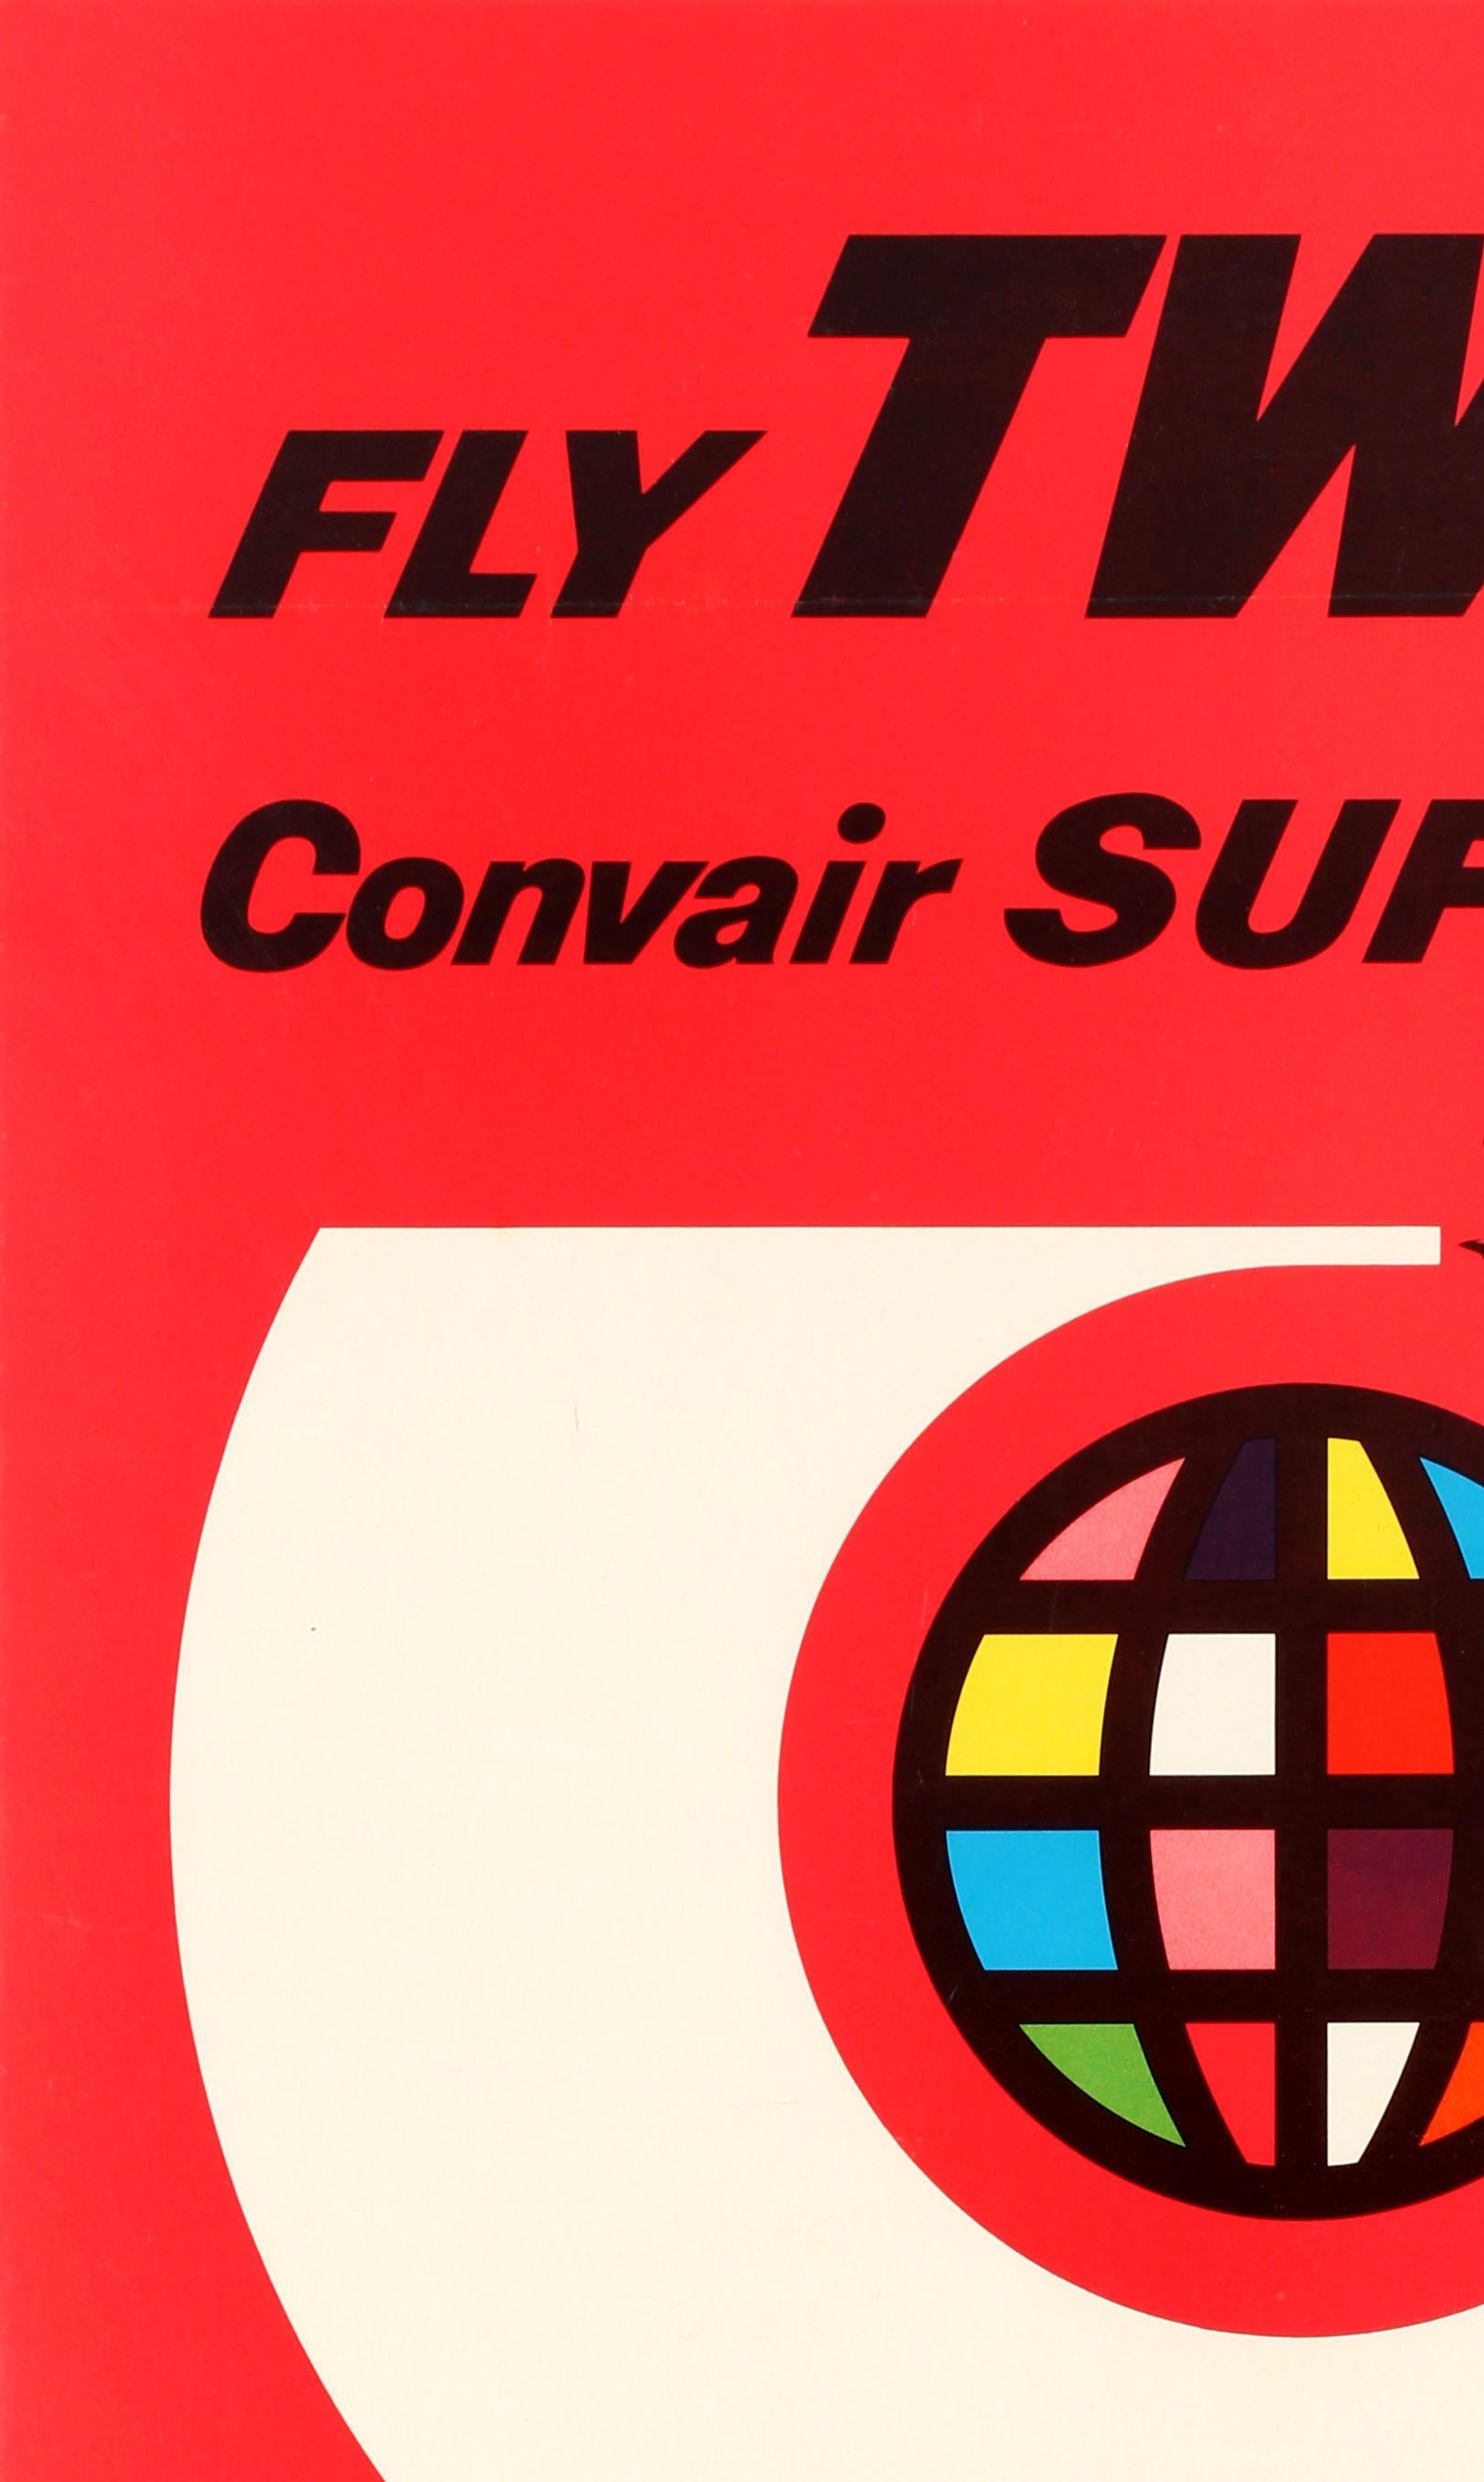 Original vintage TWA poster advertising Convair Superjet flights. Great graphic modernist illustration featuring a plane circling a multicolored globe leaving a white trail, against the bold red background with the text above and below: Fly TWA